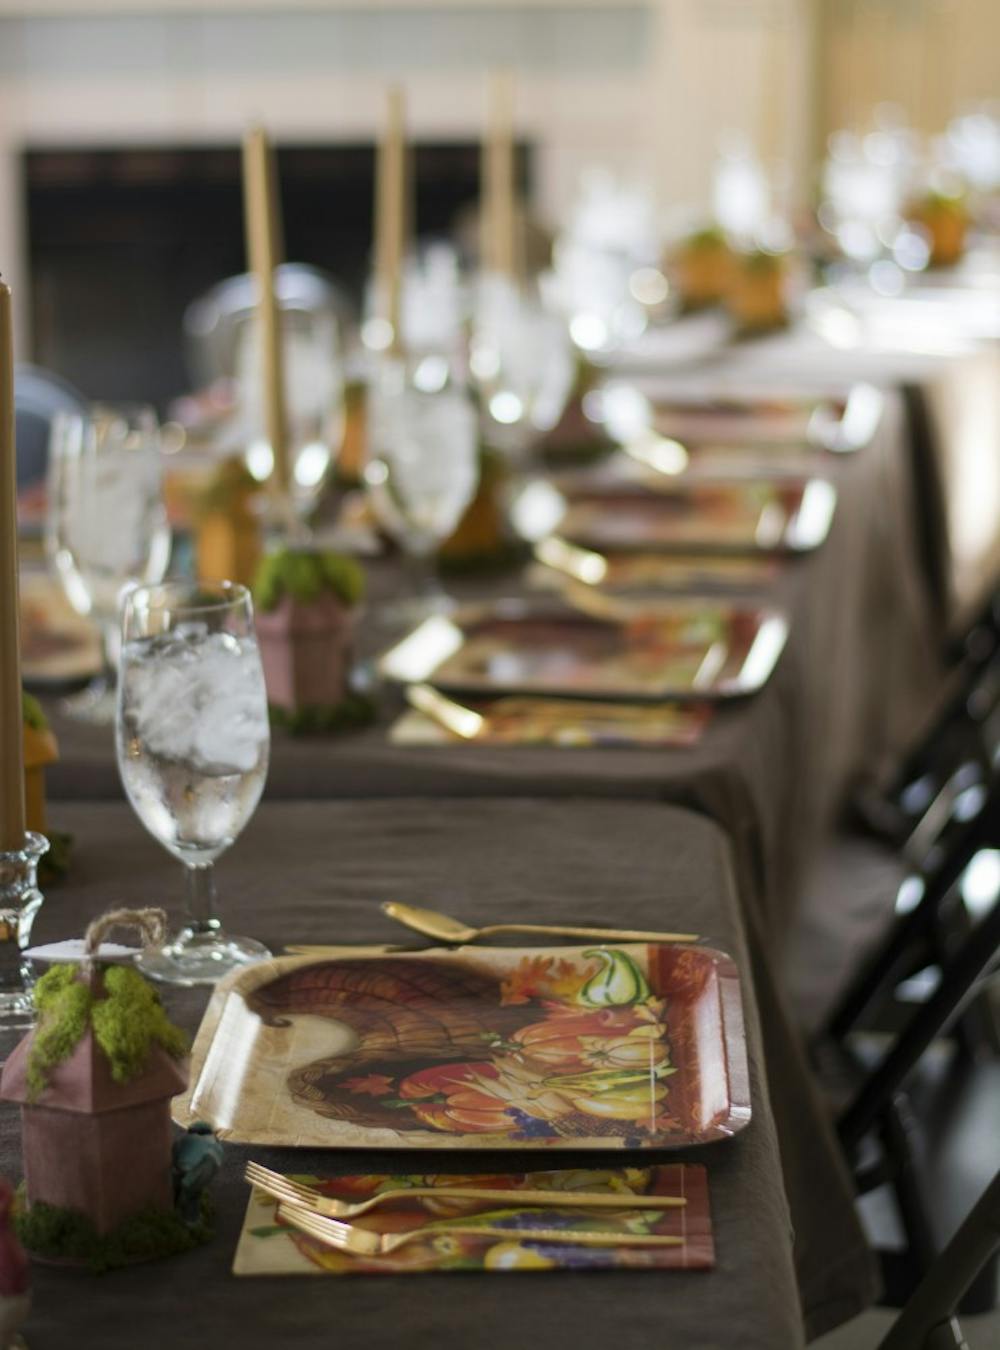 <p>Friends get together to enjoy a Thanksgiving meal for a Friendsgiving celebration. Here are five tips to keep it stress-free and enjoyable. <em>Samantha Brammer // DN</em></p>